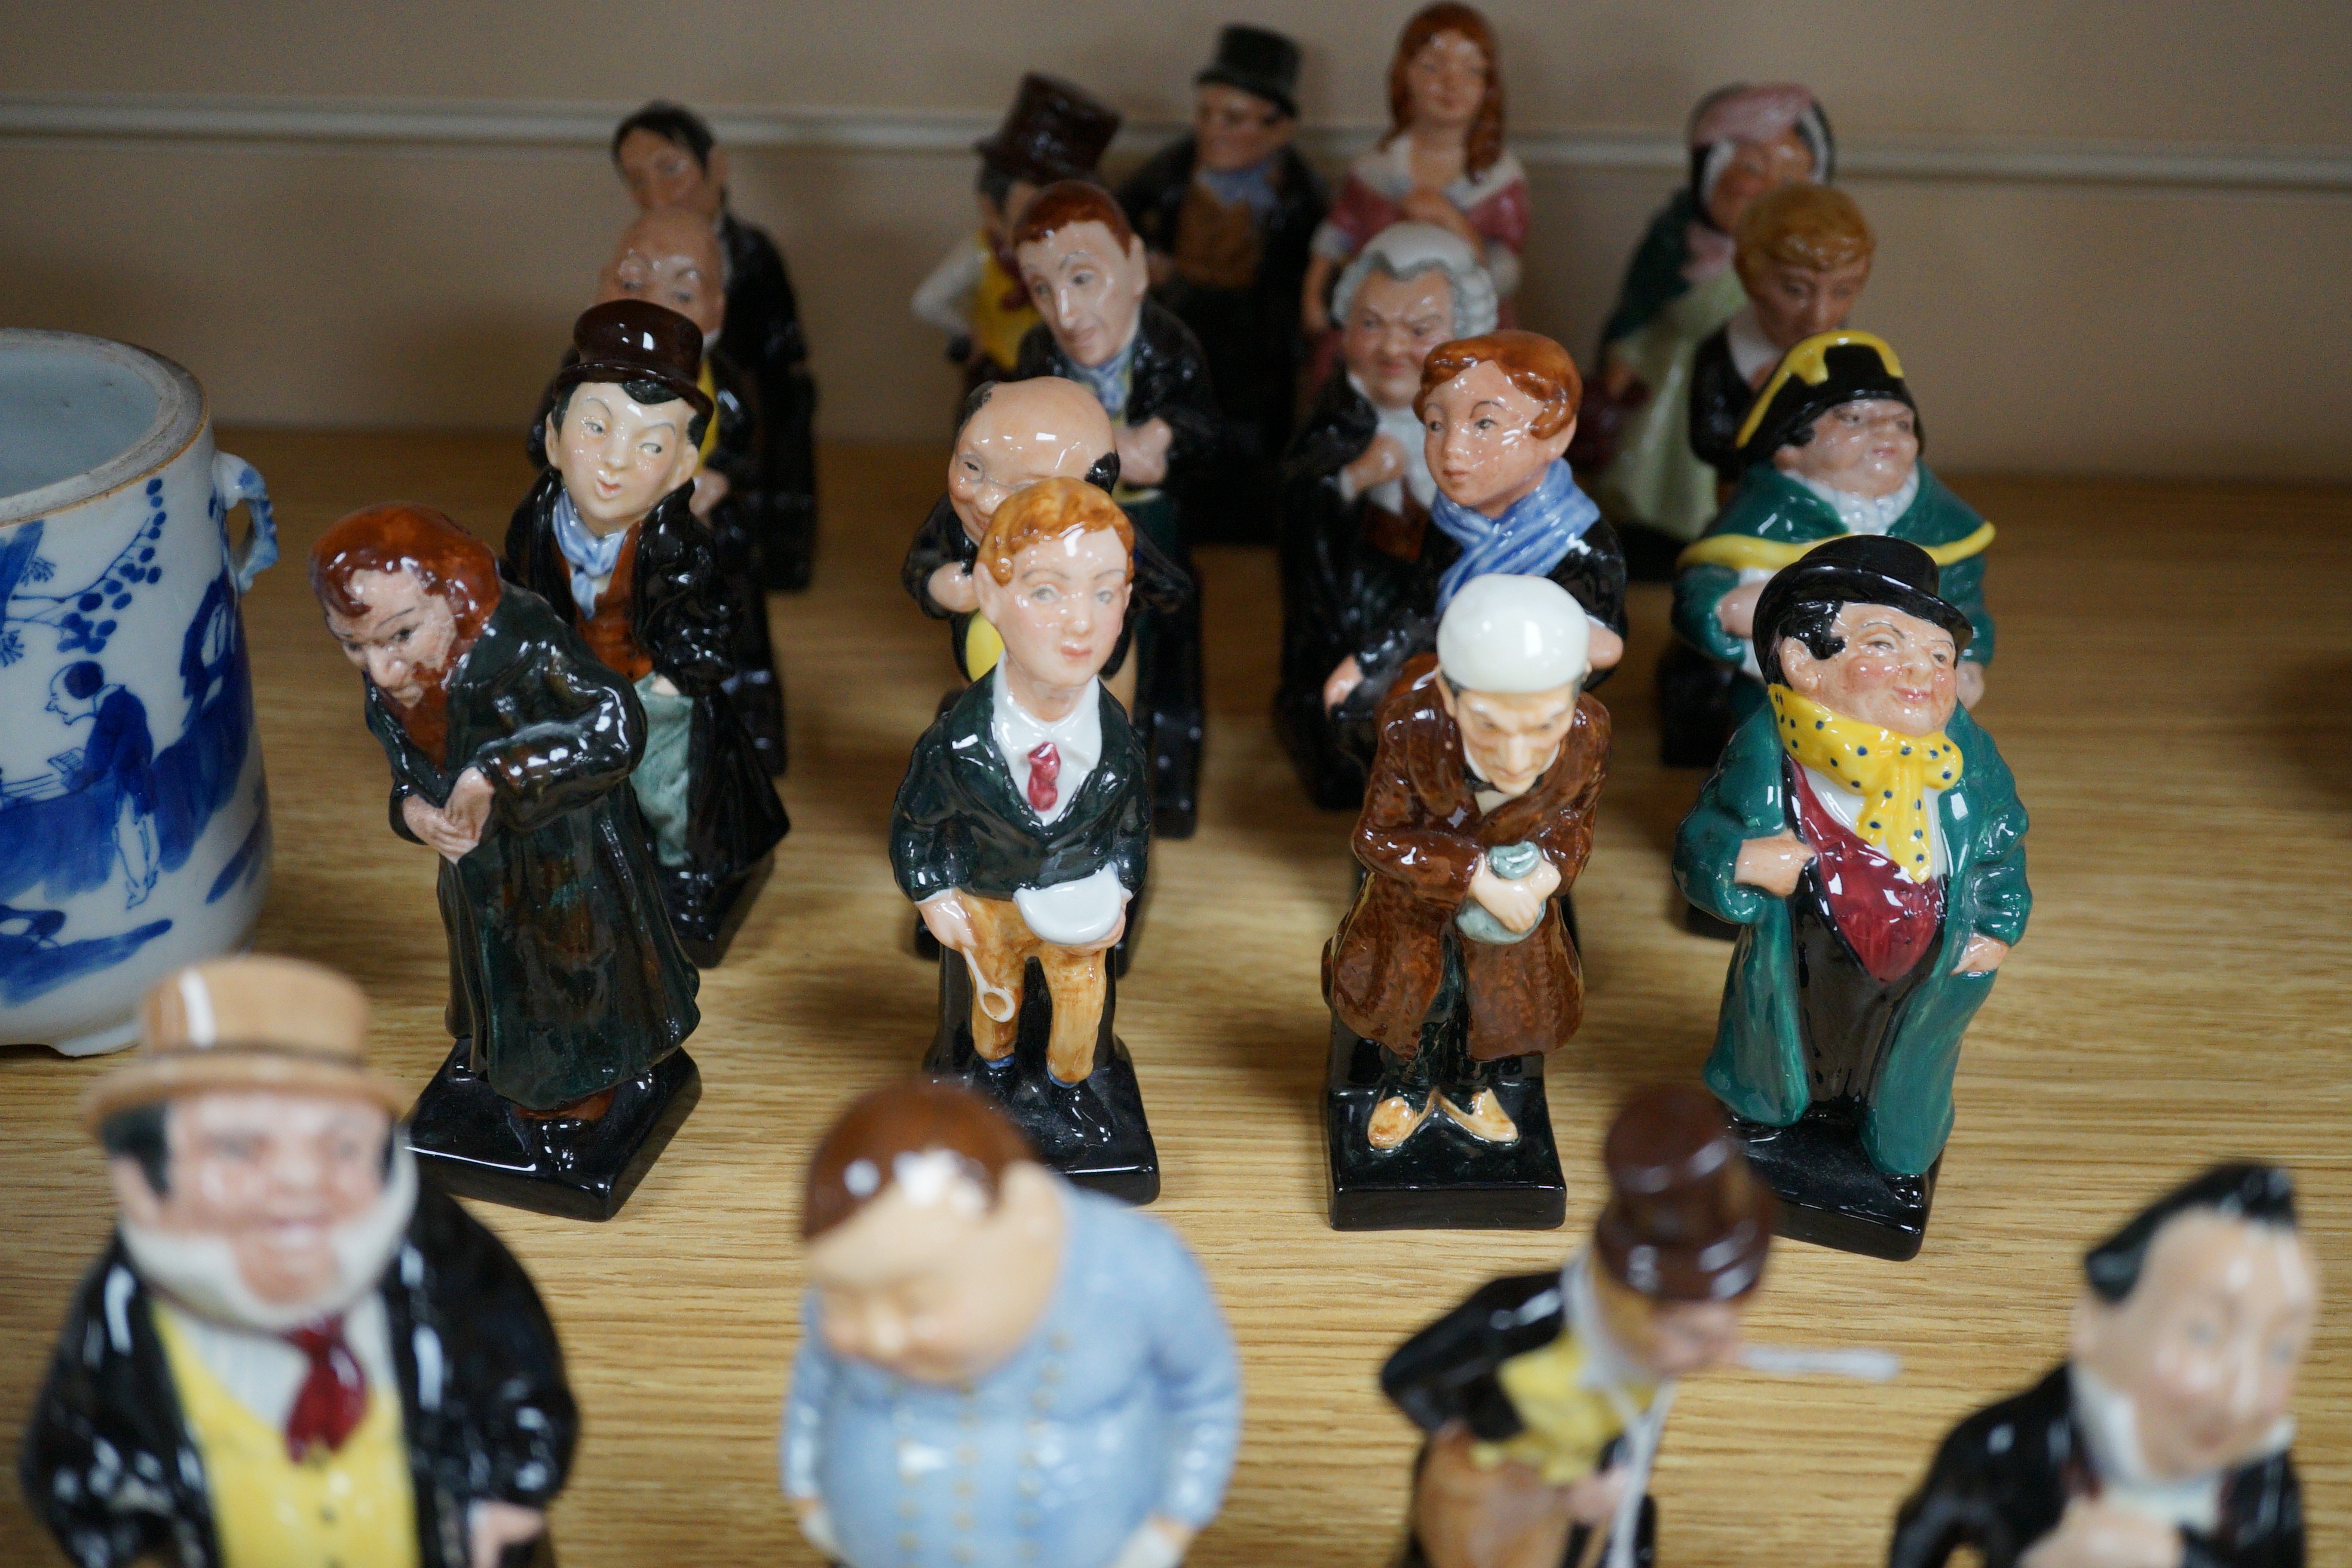 A group of twenty five Royal Doulton Dickens characters